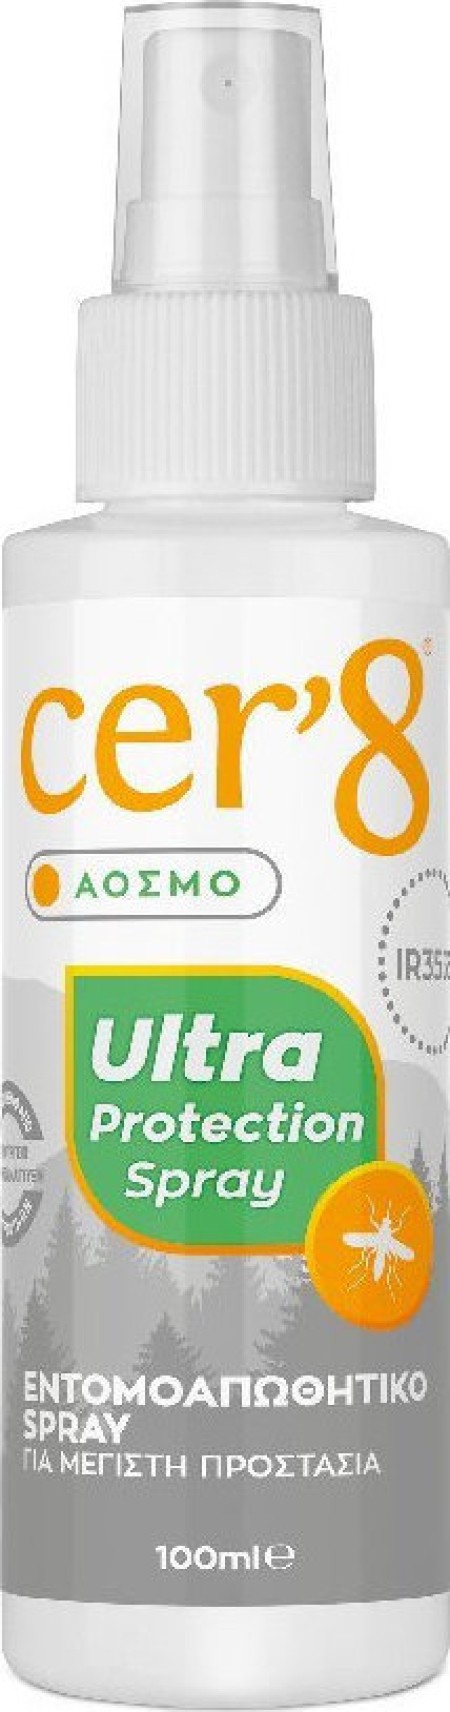 Vican - Cer8 Ultra Protection Spray 100ml